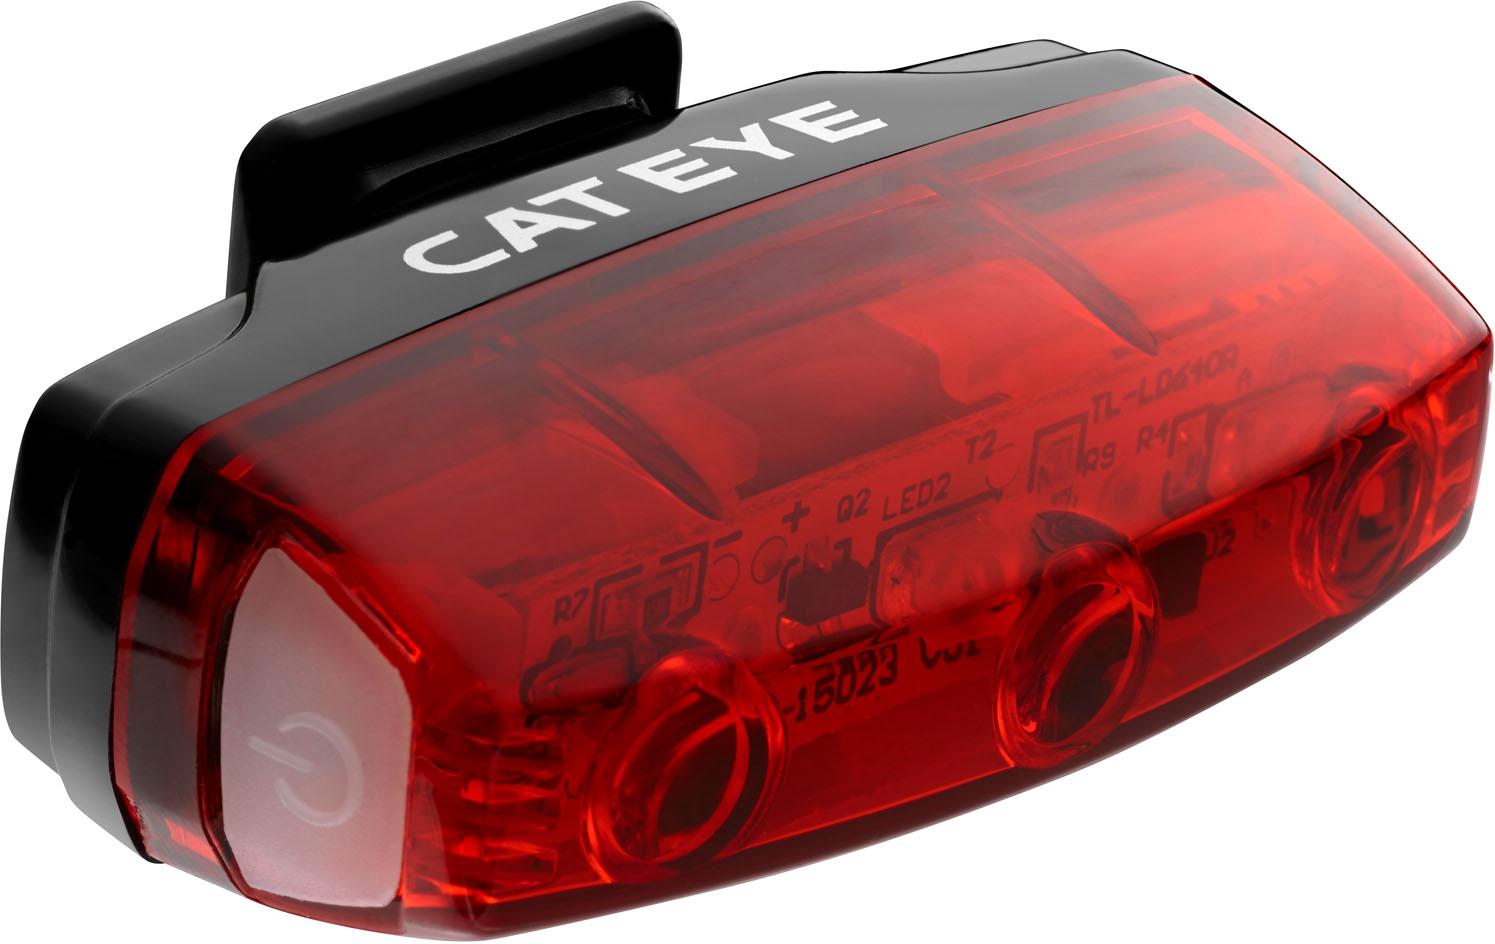 Cateye Rapid Micro Usb Rechargeable Rear Light  Black/red